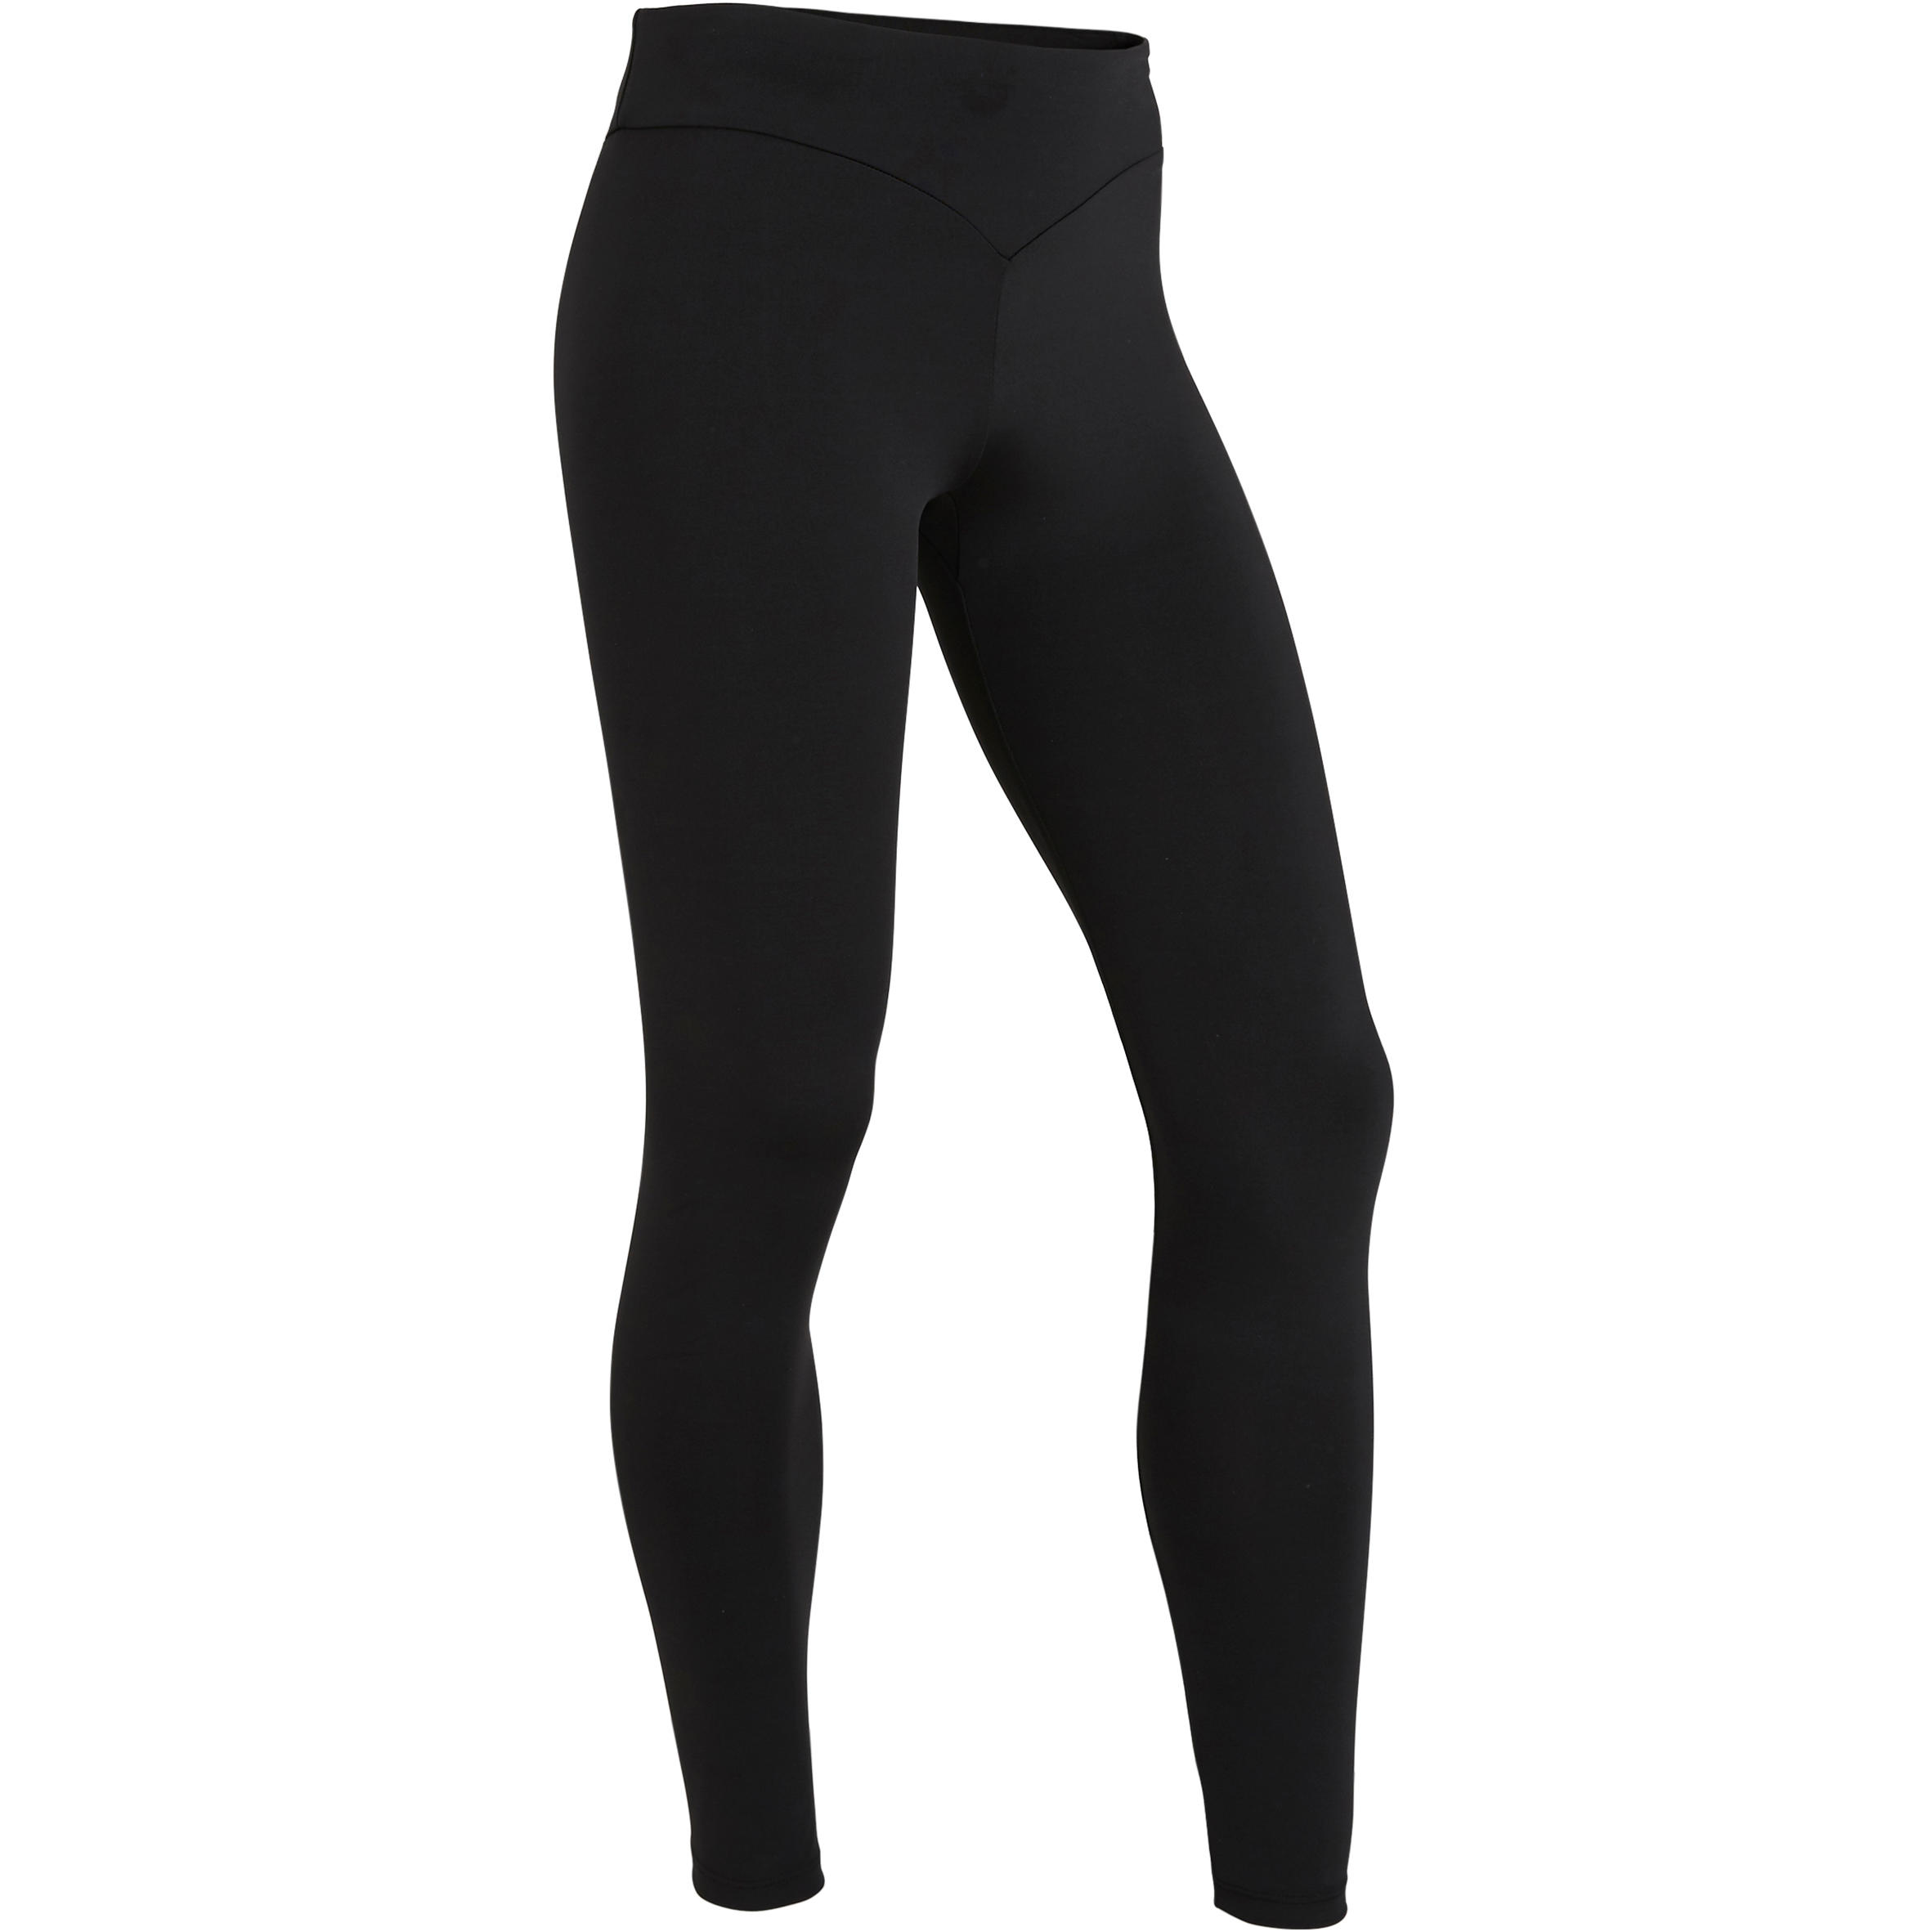 Women's running leggings with body-sculpting (XS to 5XL - Large size) -  black - Decathlon